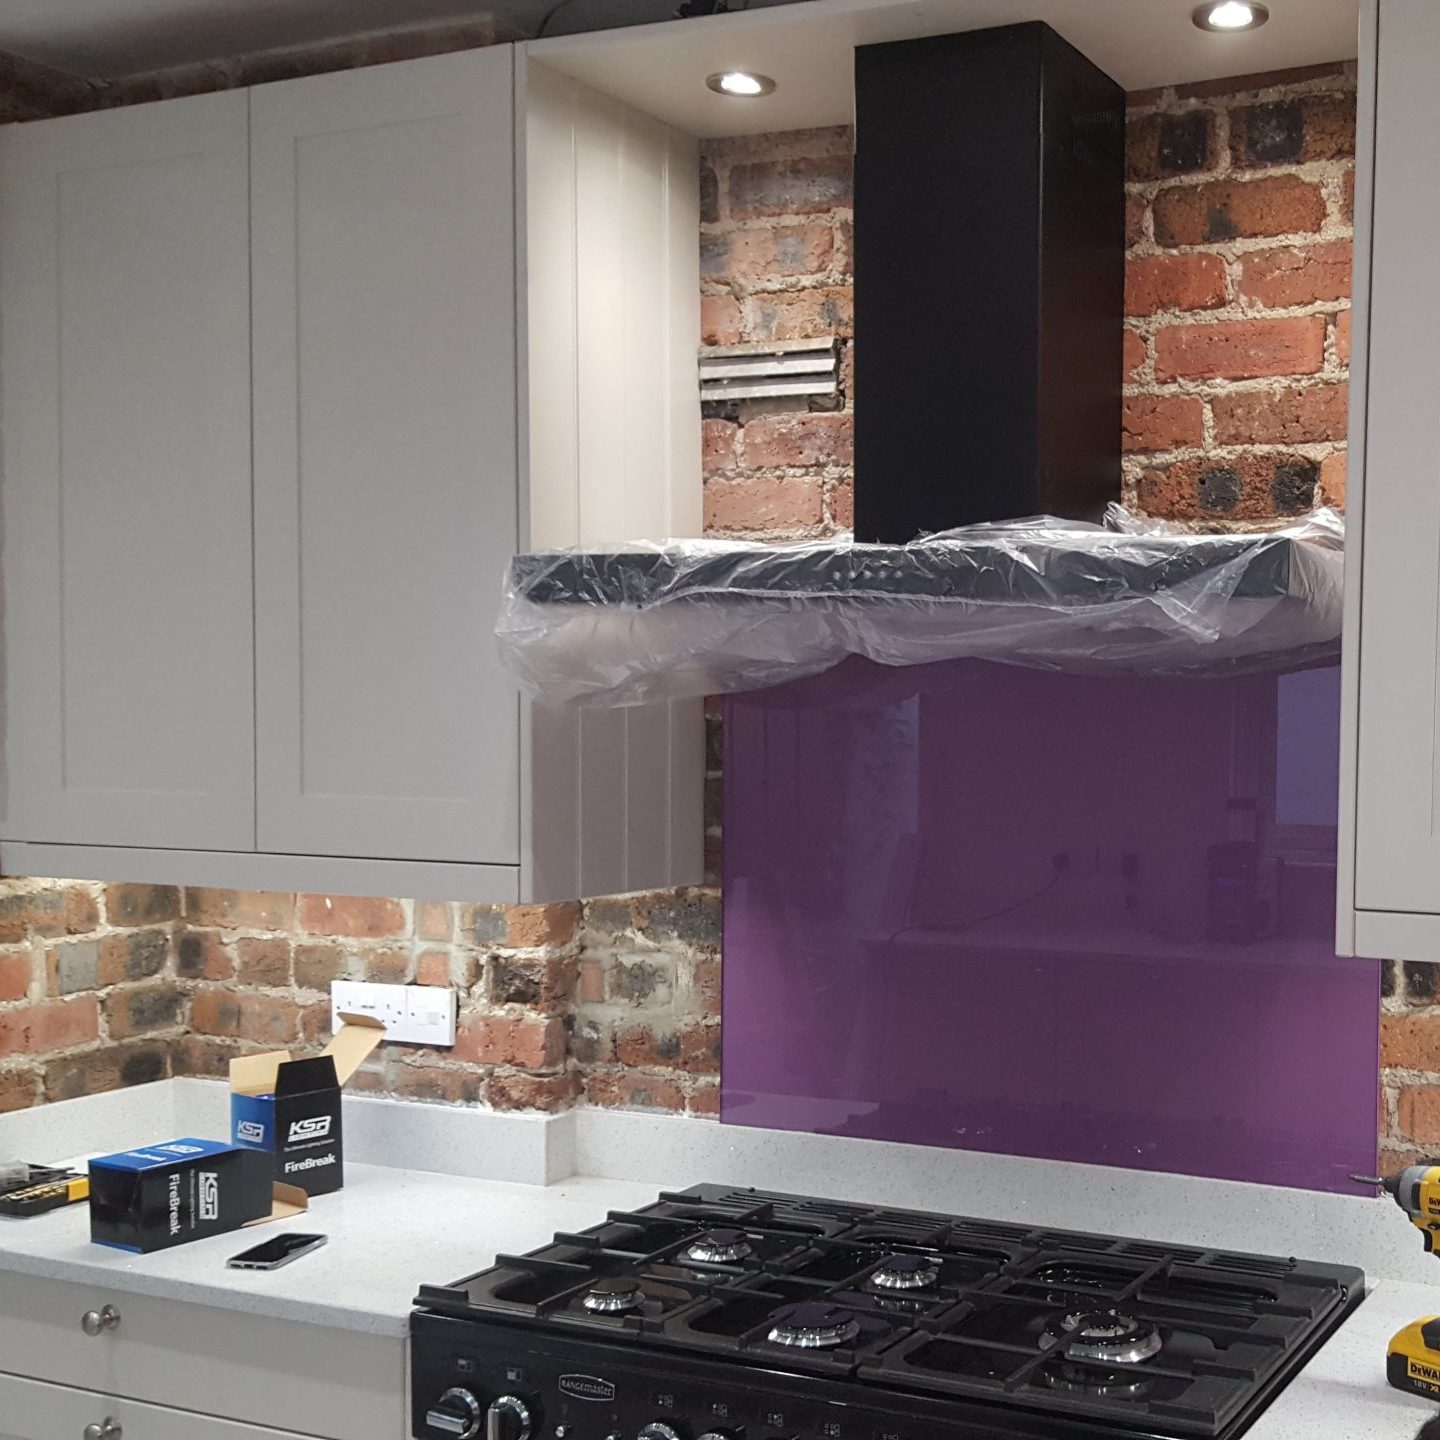 Kitchen with electrical appliance, brick walls for back splash